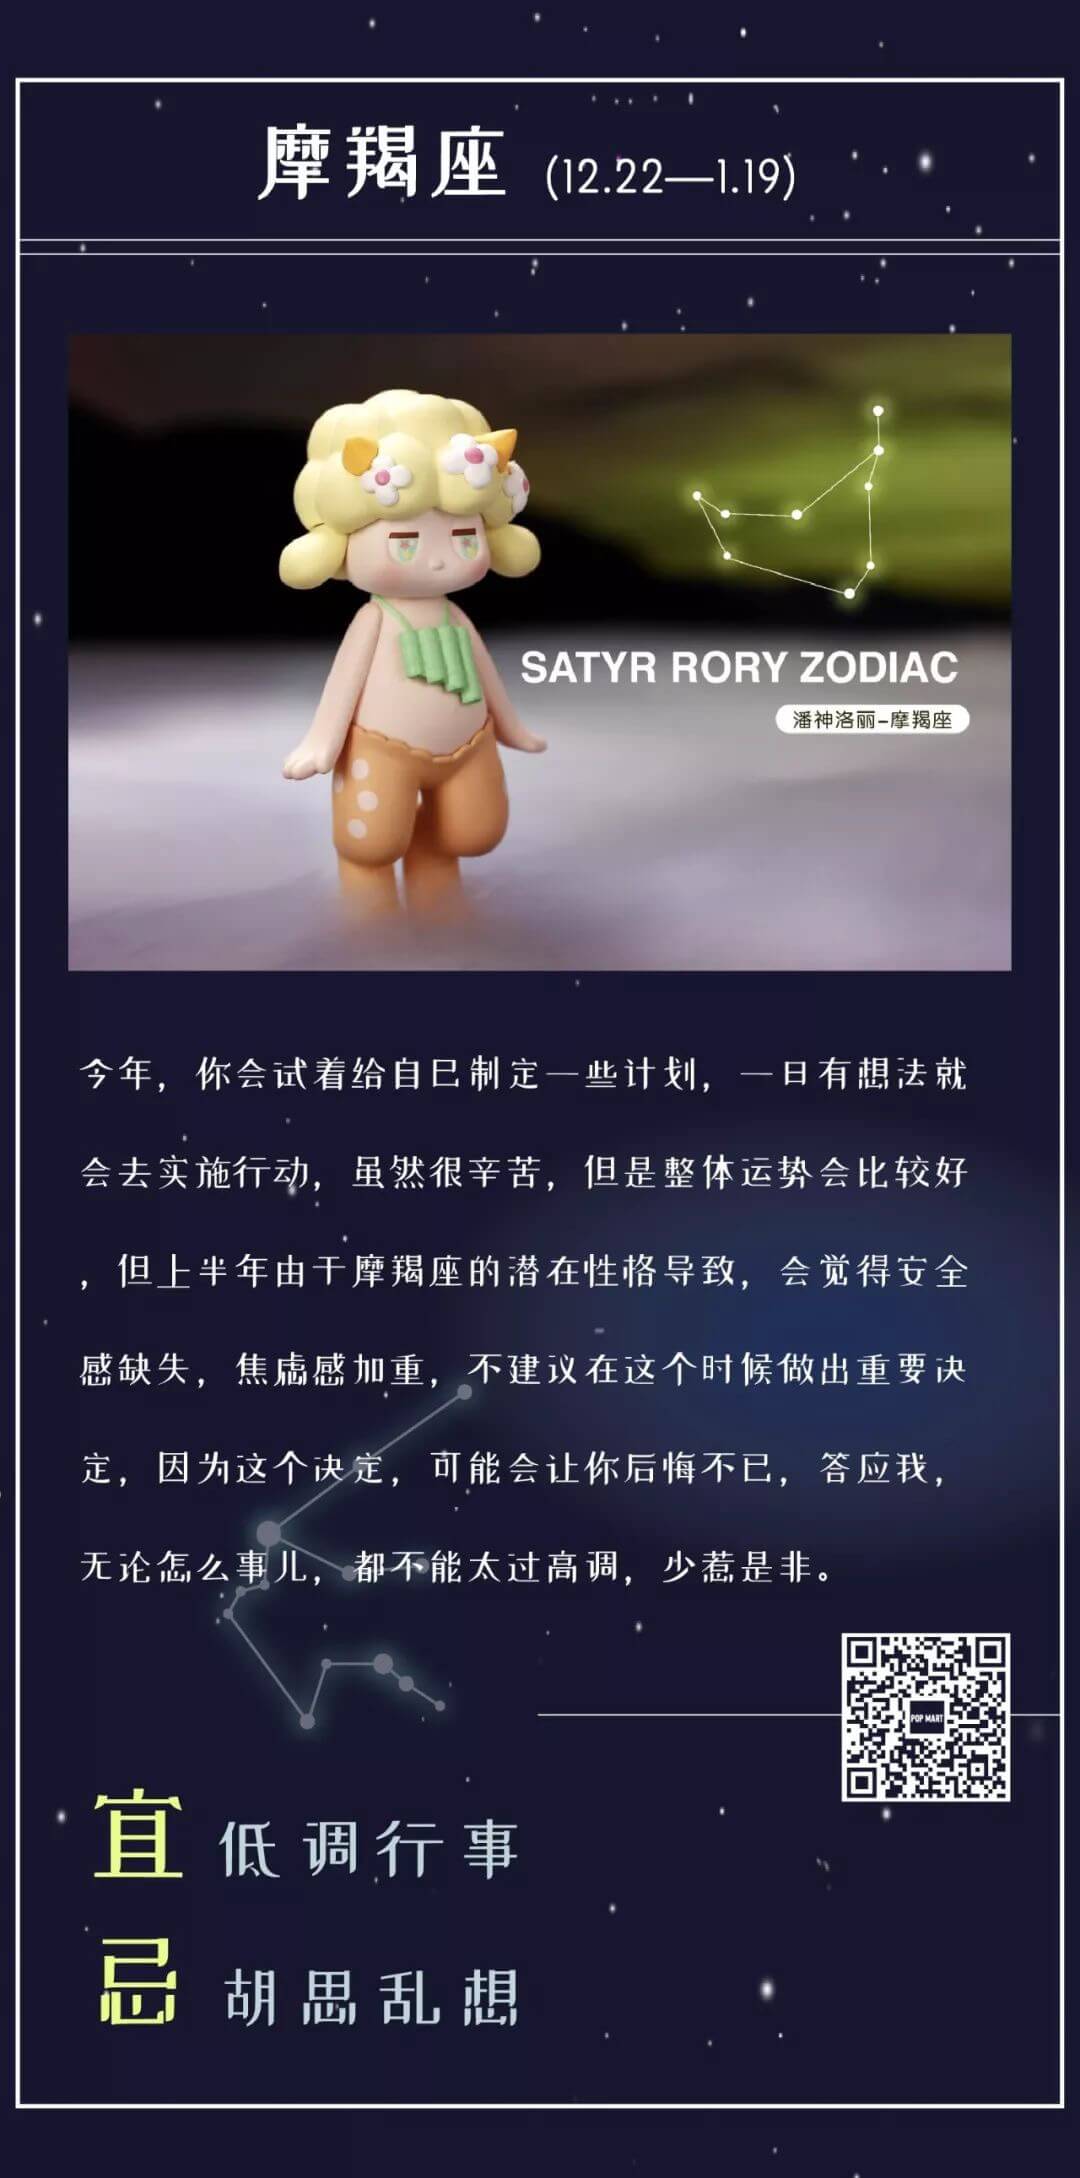 Satyr-Rory-Zodic-Edition-Mini-Series-by-Seulgie-Lee-x-POP-MART-the-toy-chronicle-2019-rrweqe